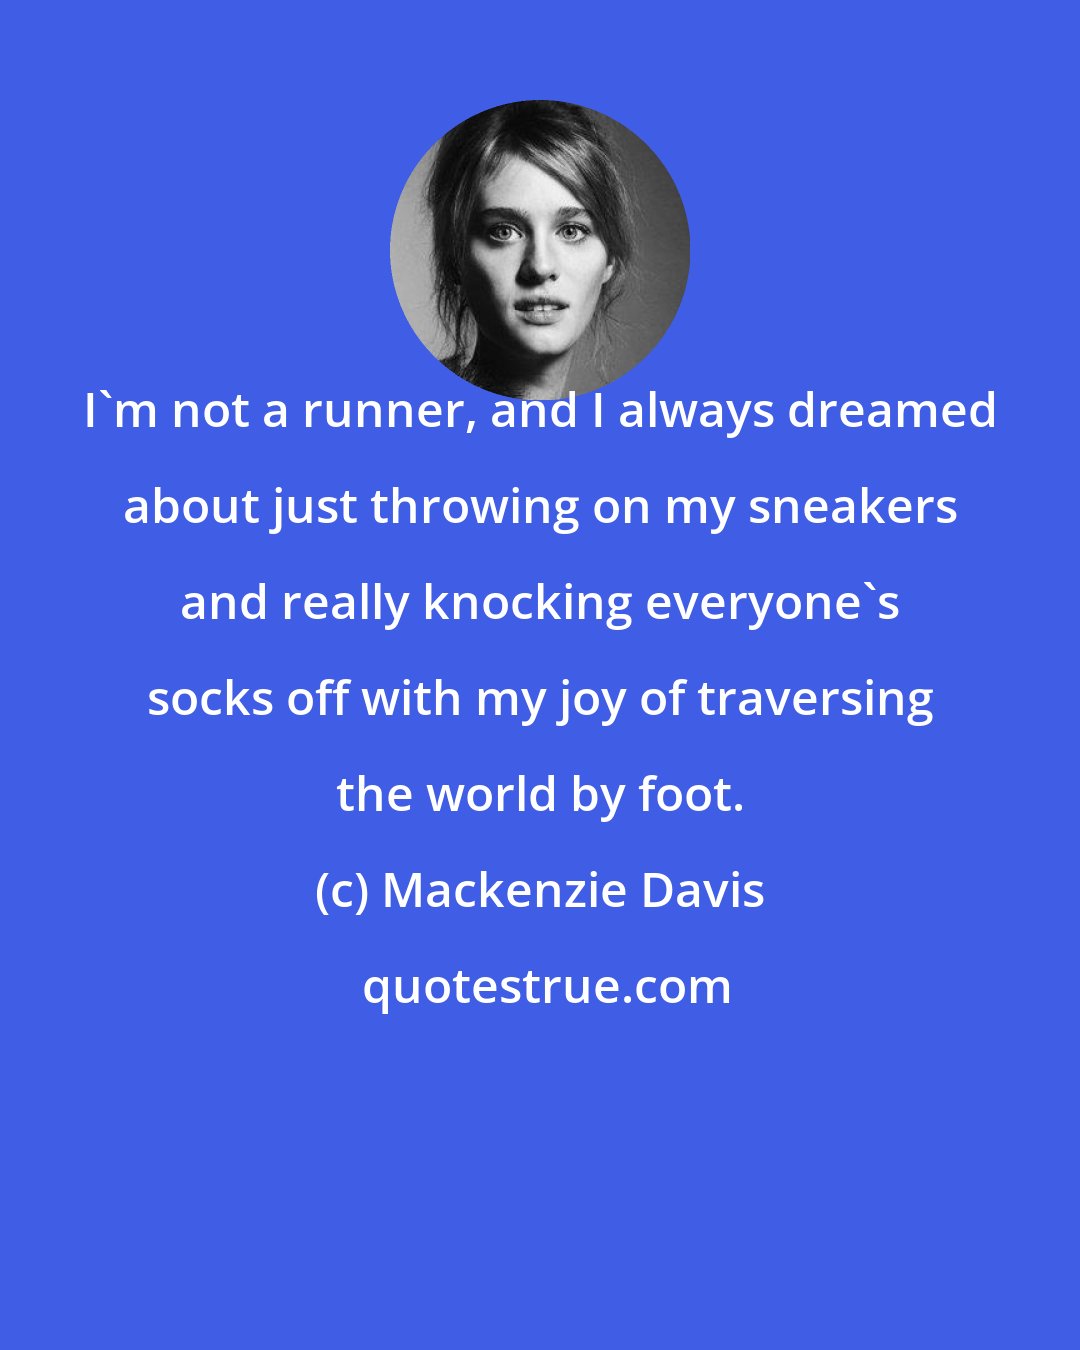 Mackenzie Davis: I'm not a runner, and I always dreamed about just throwing on my sneakers and really knocking everyone's socks off with my joy of traversing the world by foot.